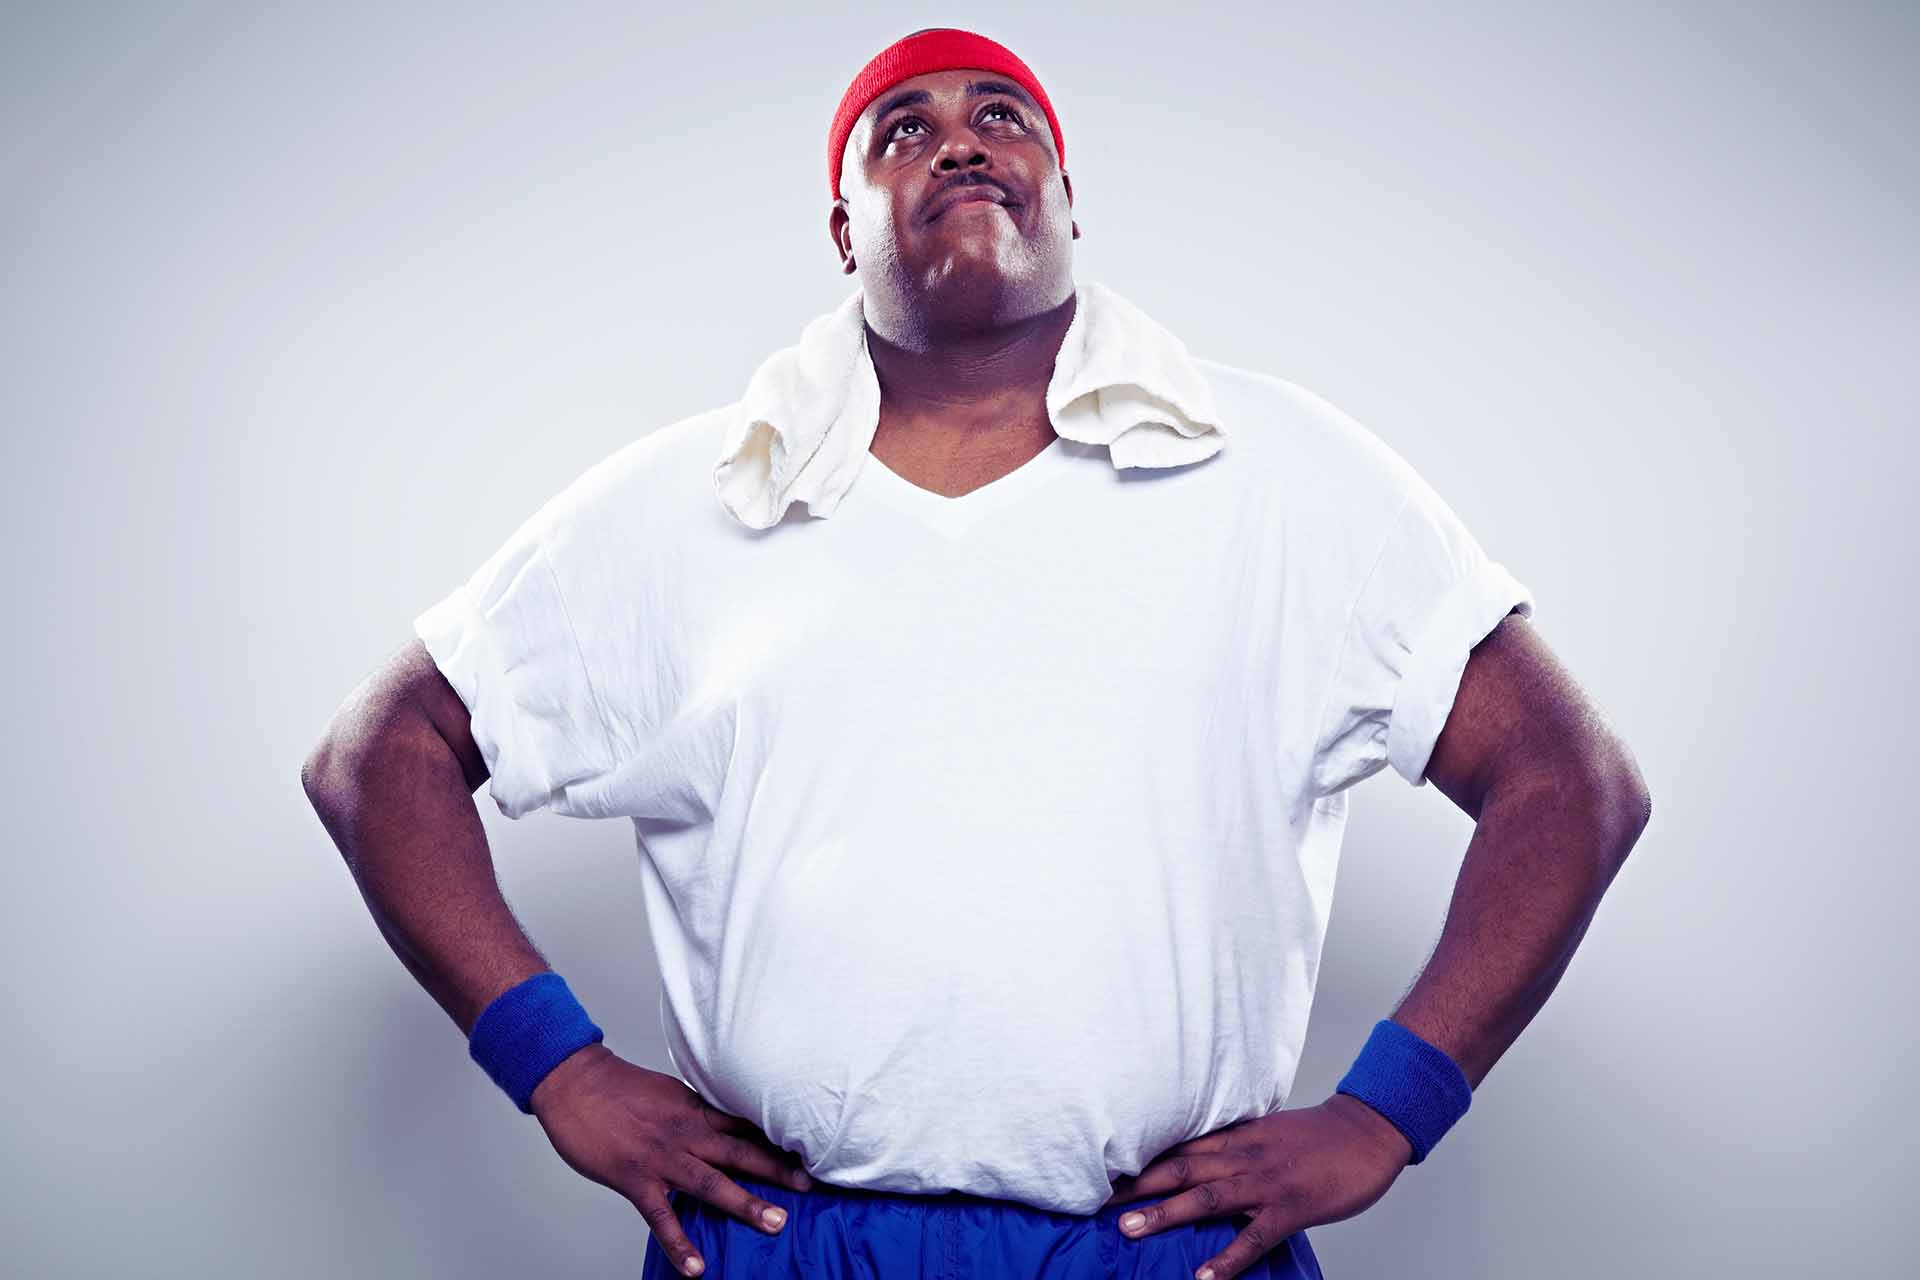 Overweight man in exercise clothing looking up post-workout.